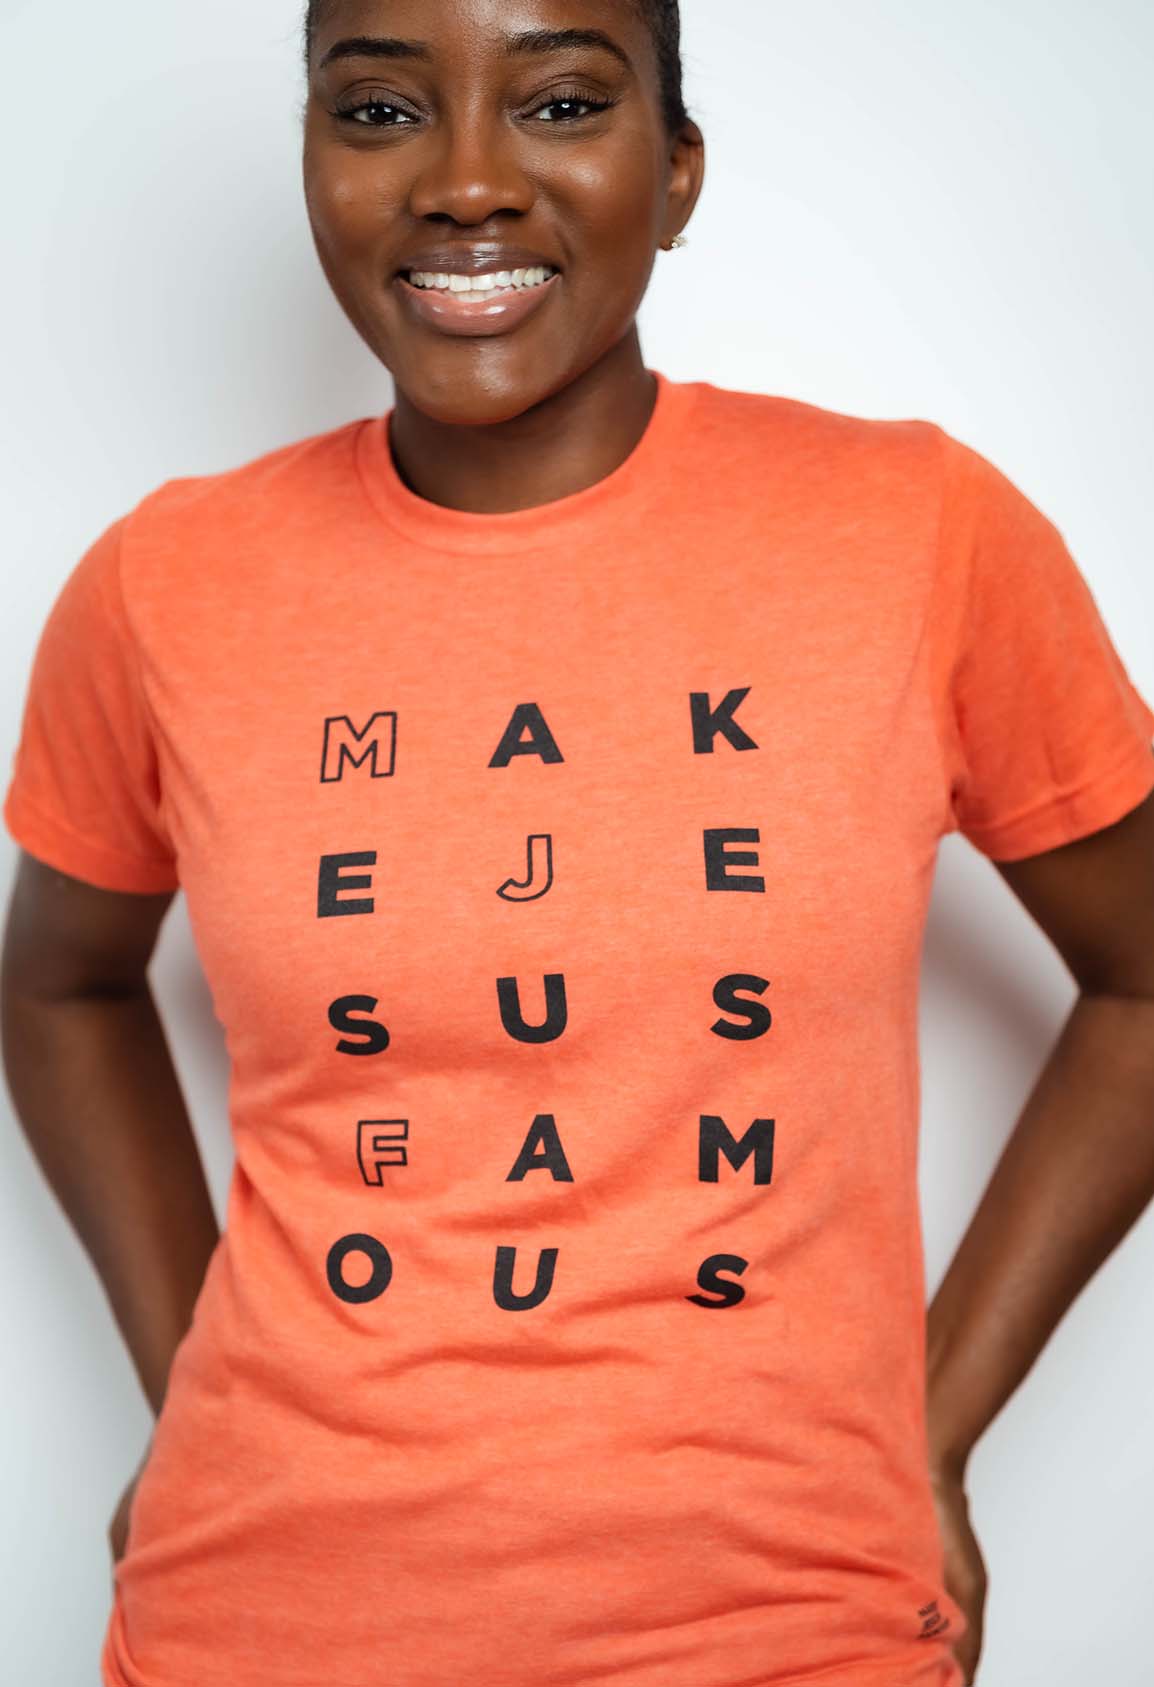 FrshFaith: Make Jesus Famous Eye Chart, drawing a focus to your faith and love for Jesus Christ.